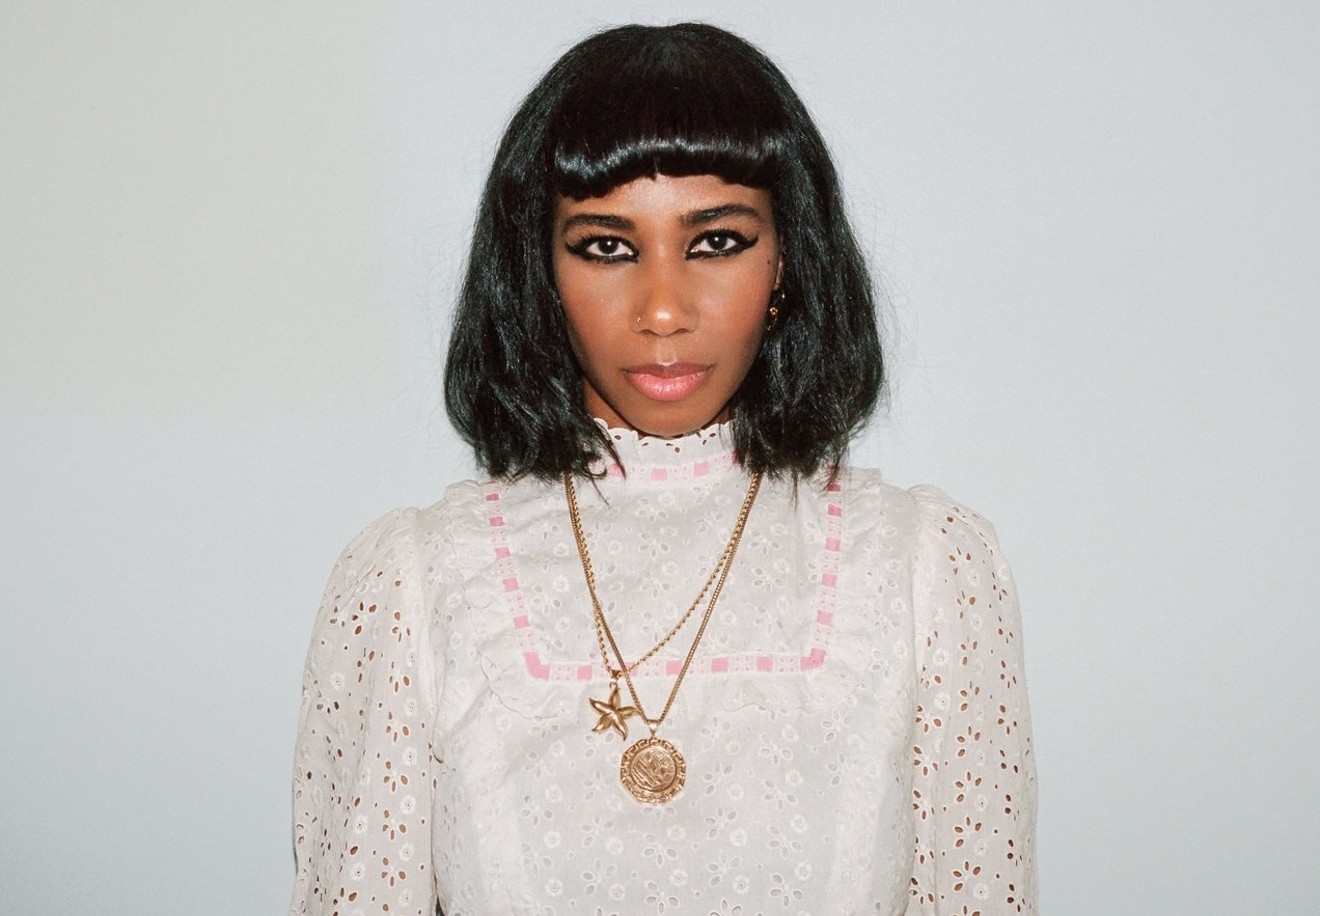 Santigold is scheduled to perform on Tuesday, May 14, at The Van Buren.